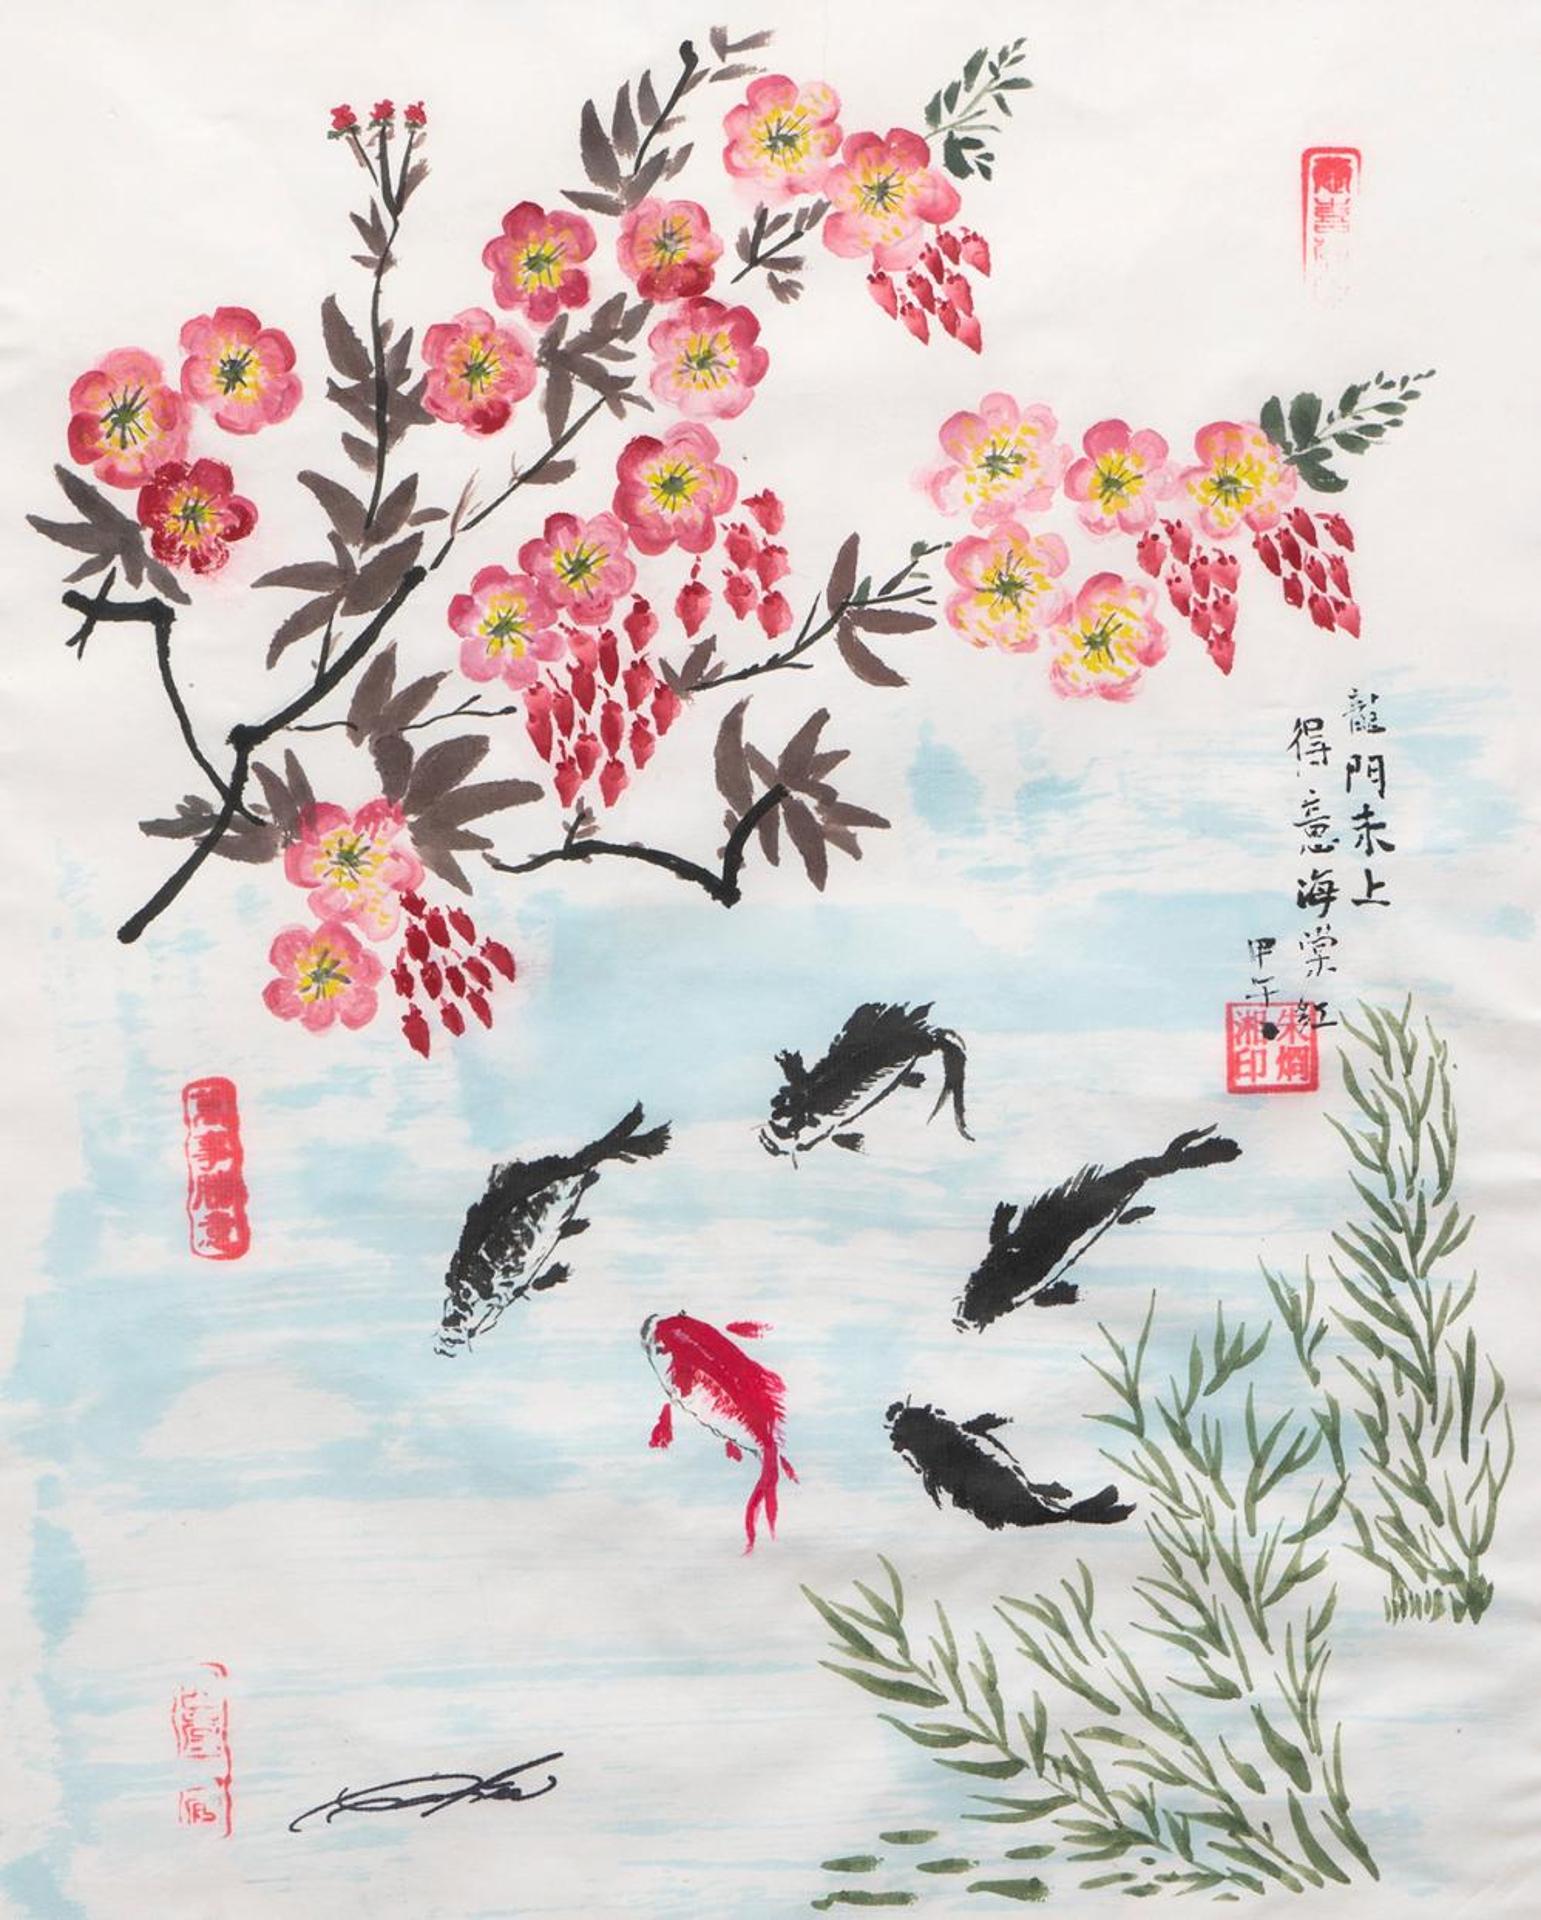 Sam Gee - Untitled - Cherry Blossoms and Koi